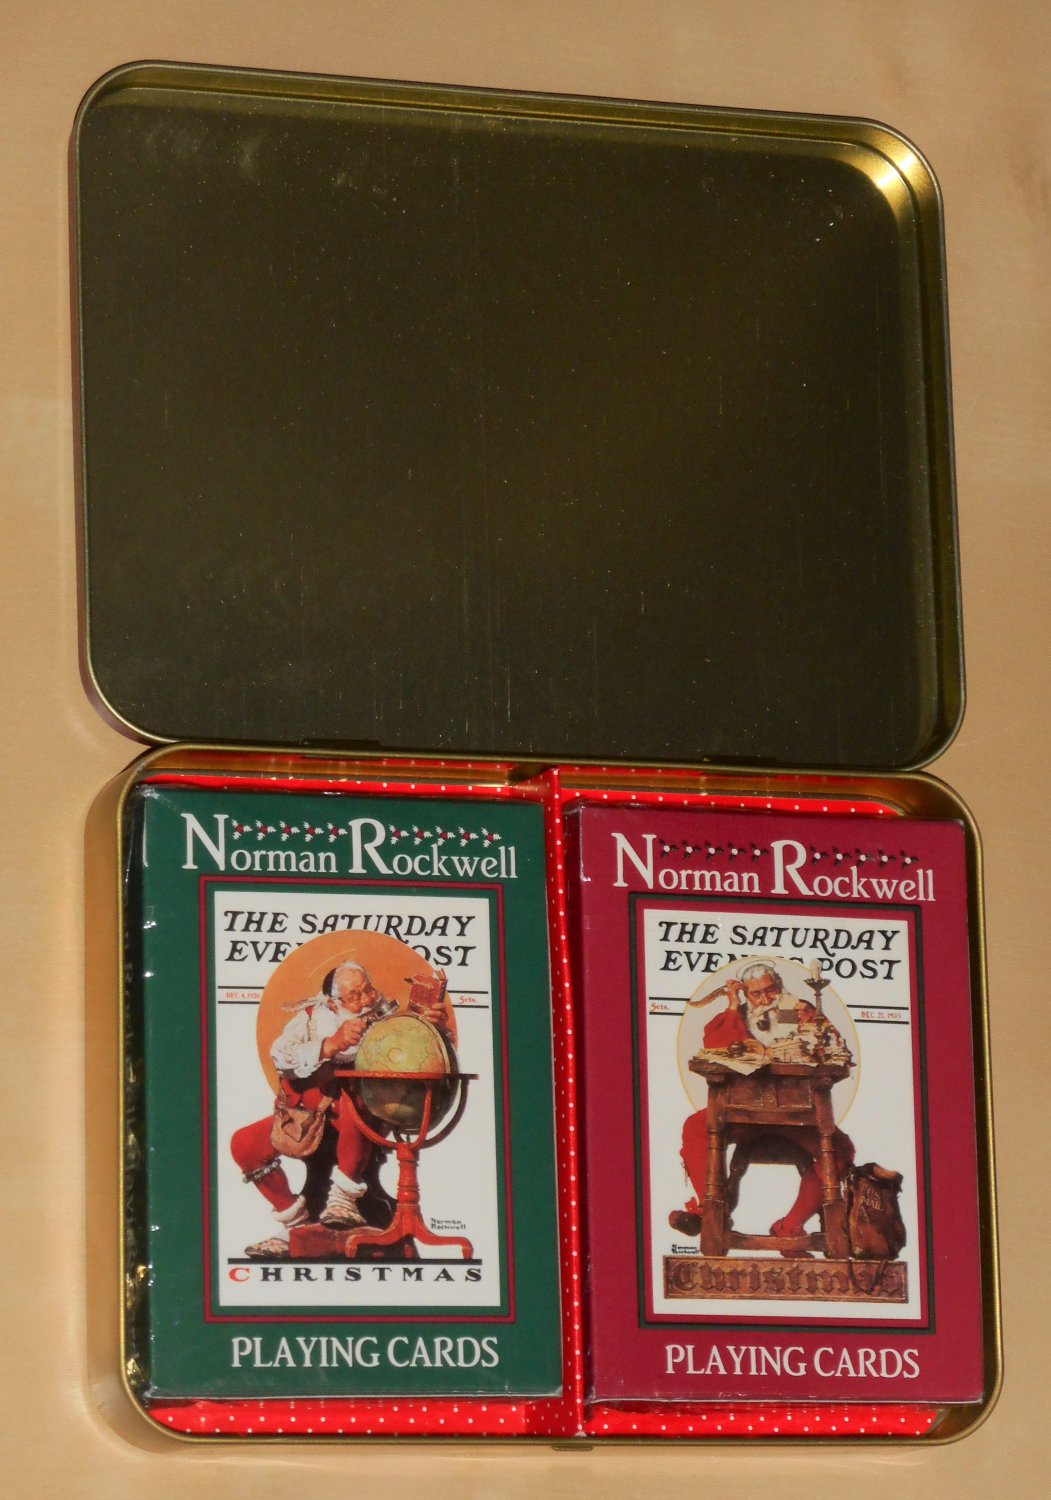 Norman Rockwell Christmas Santa Claus United States Playing Cards 2 Decks Sealed Tin Case 1996